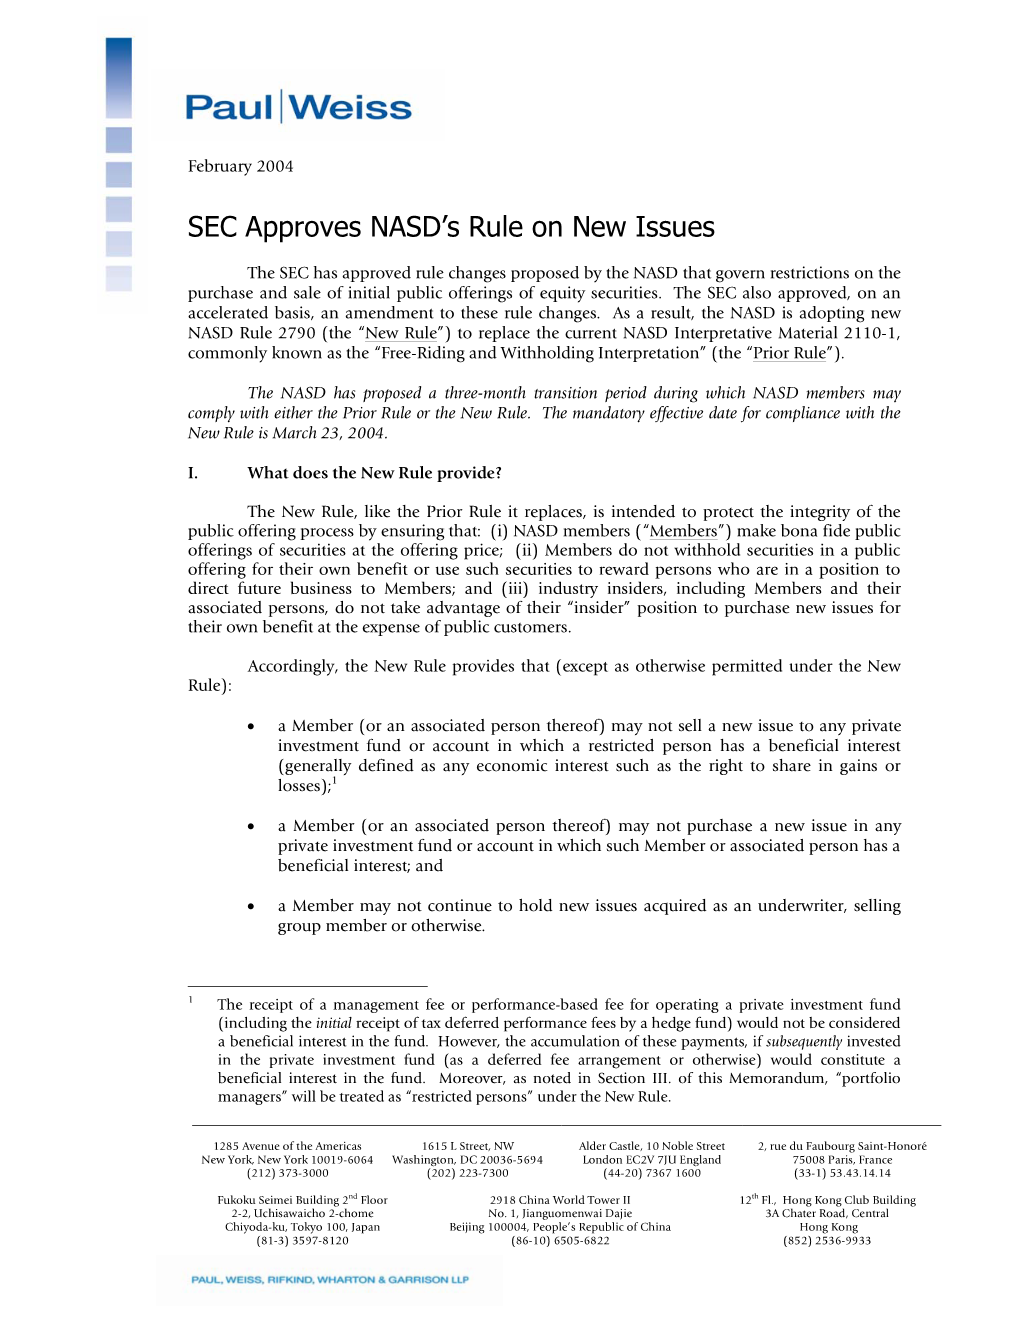 SEC Approves NASD's Rule on New Issues